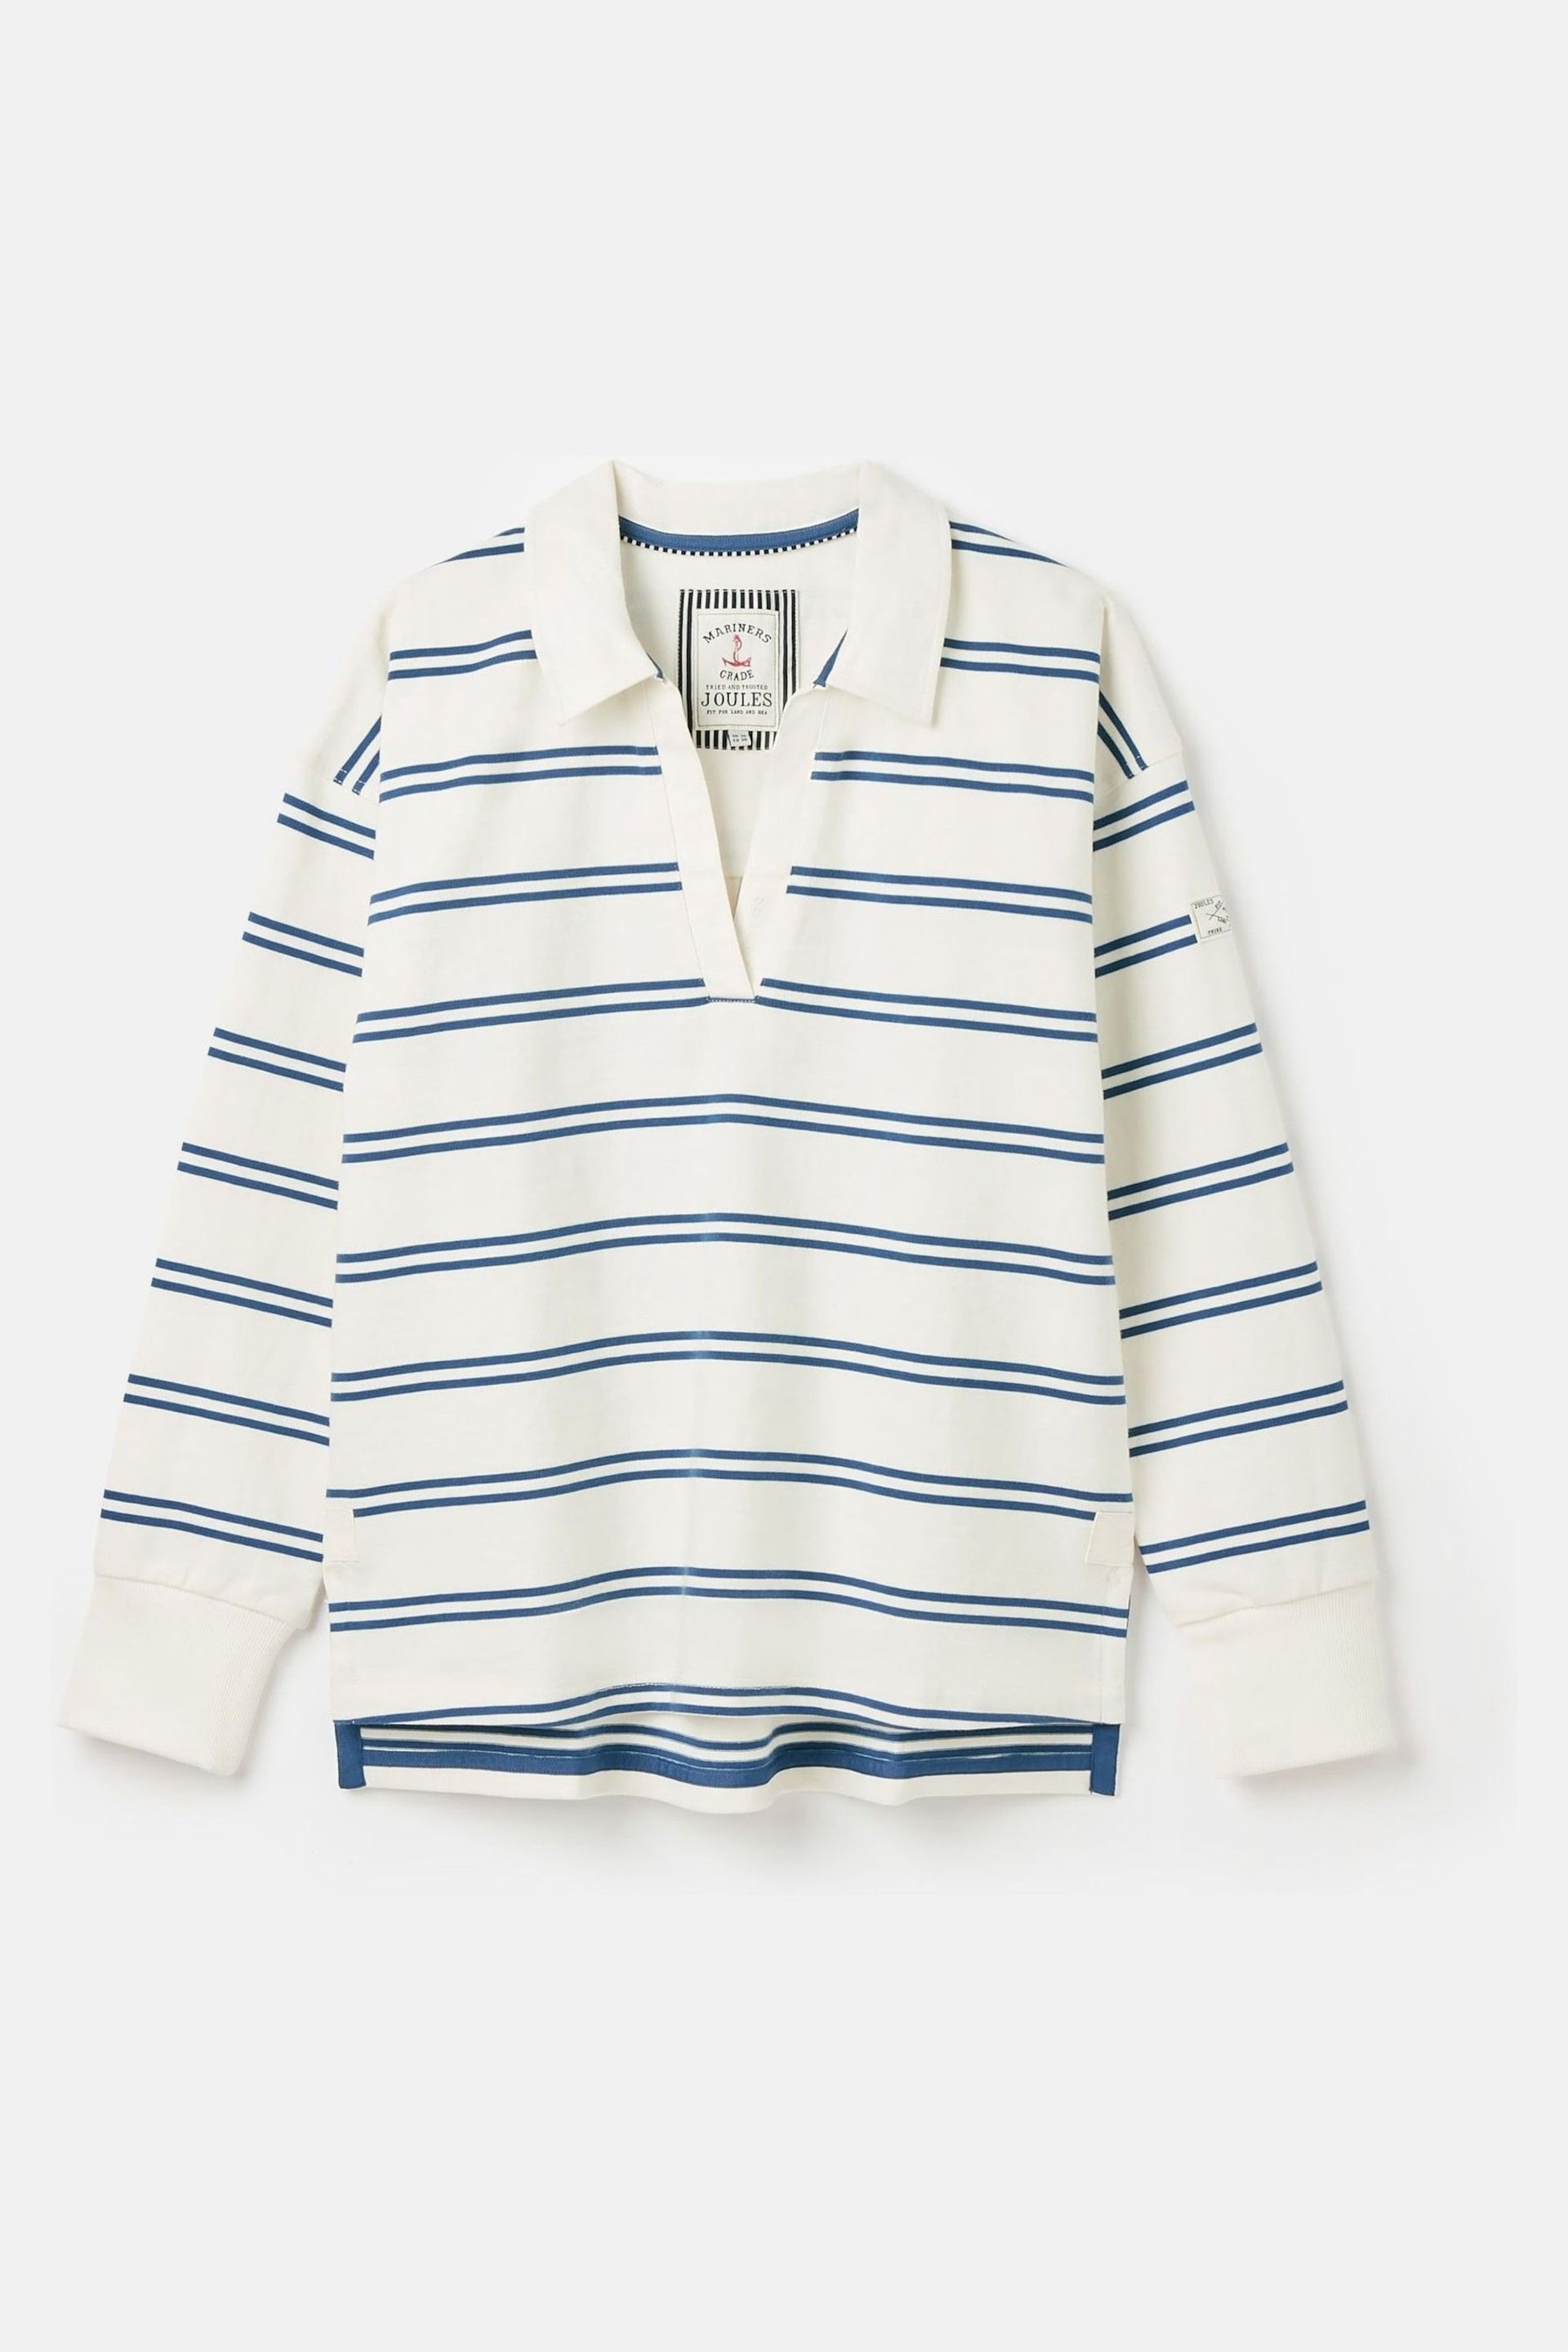 Joules Bayside Cream/Navy Cotton Deck Shirt - Image 7 of 7